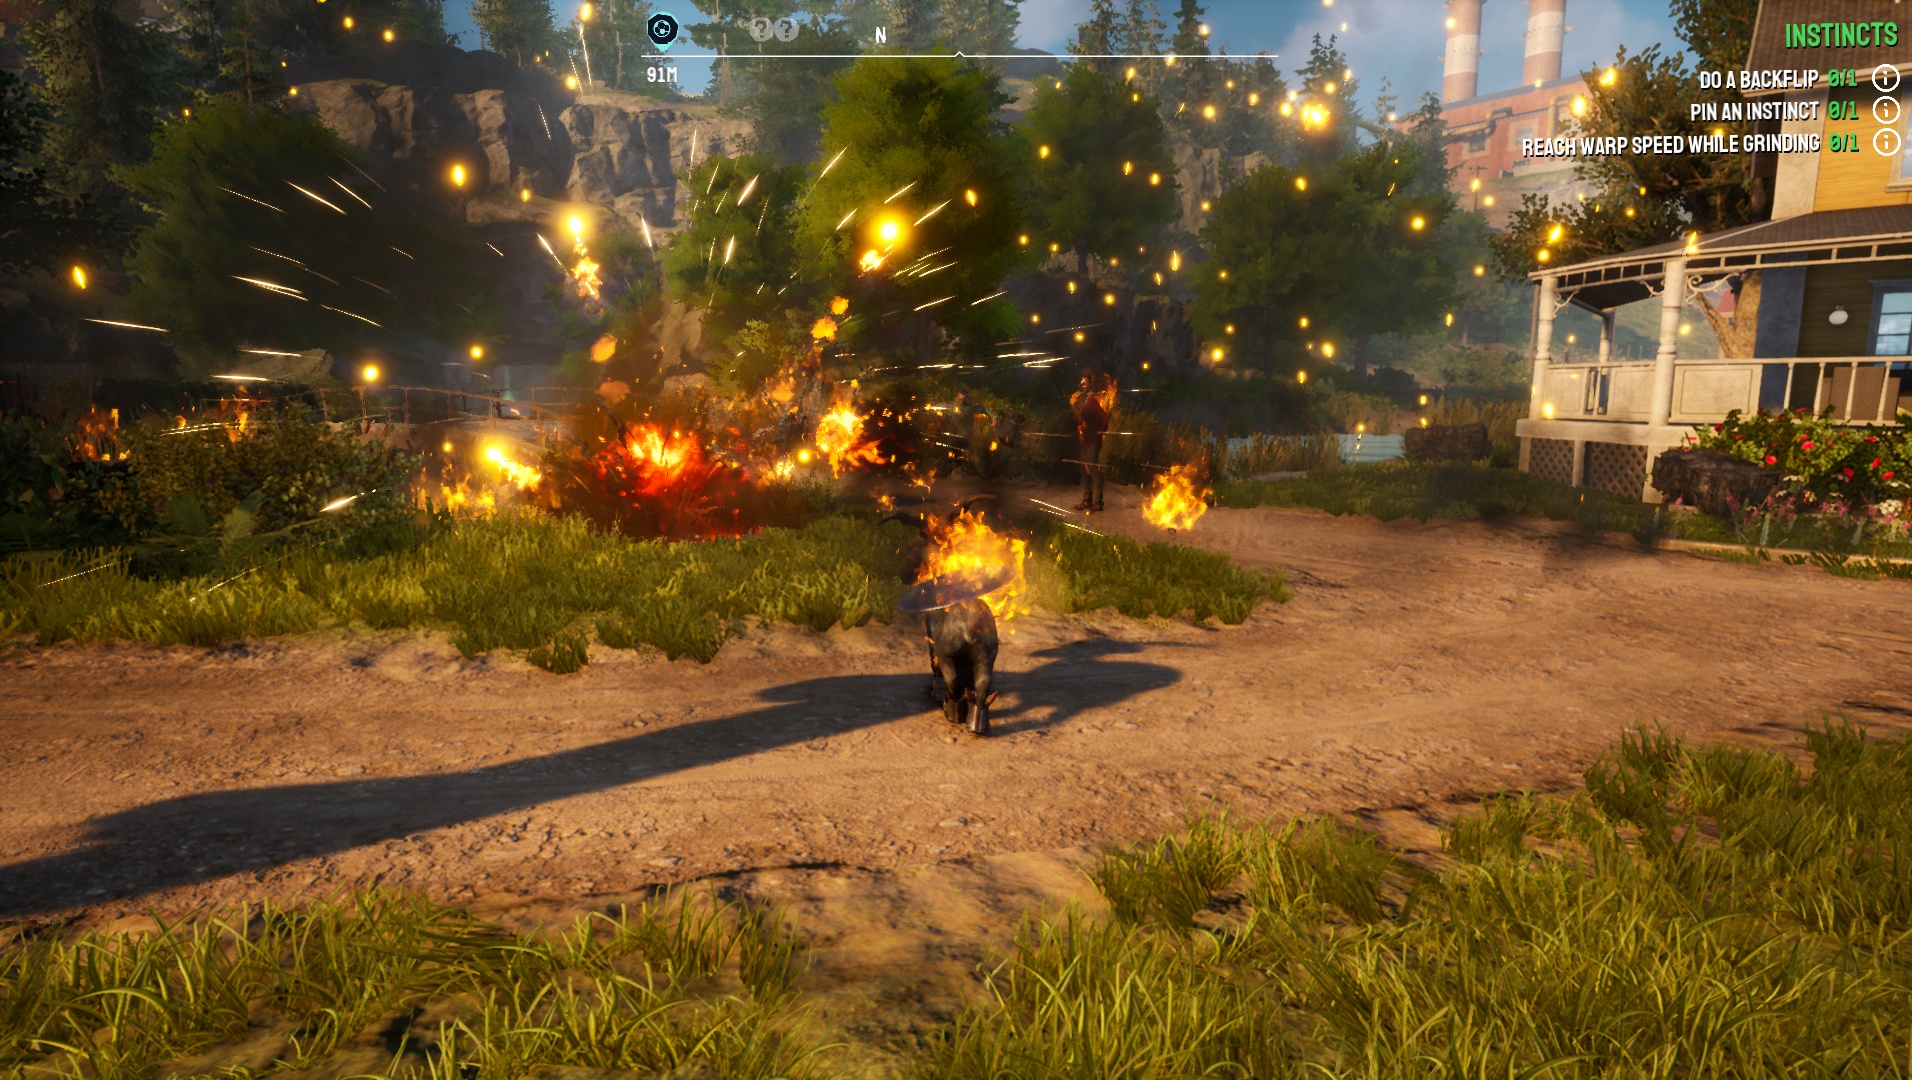 (Chaos, fire, explosions in Goat Simulator 3 really go off. The violence level remains harmless though, no one dies.)